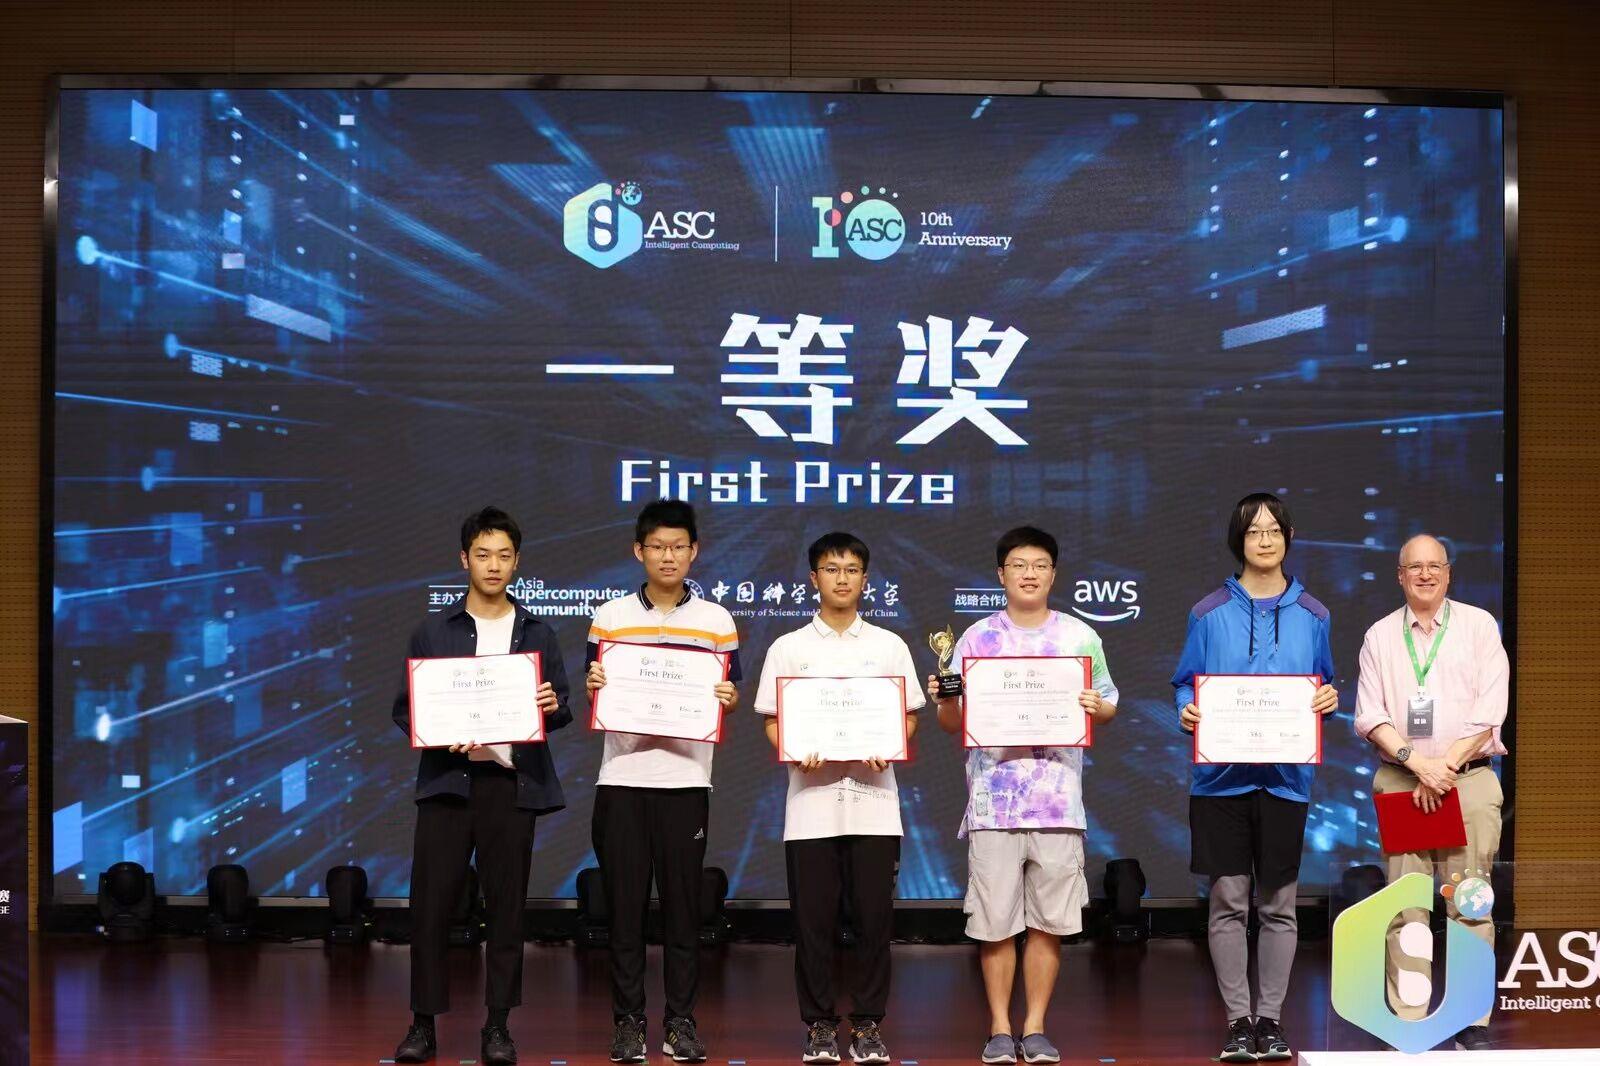 SUSTech’s Undergraduate Supercomputing Team wins first prize at 10th ASC Student Supercomputer Challenge Finals